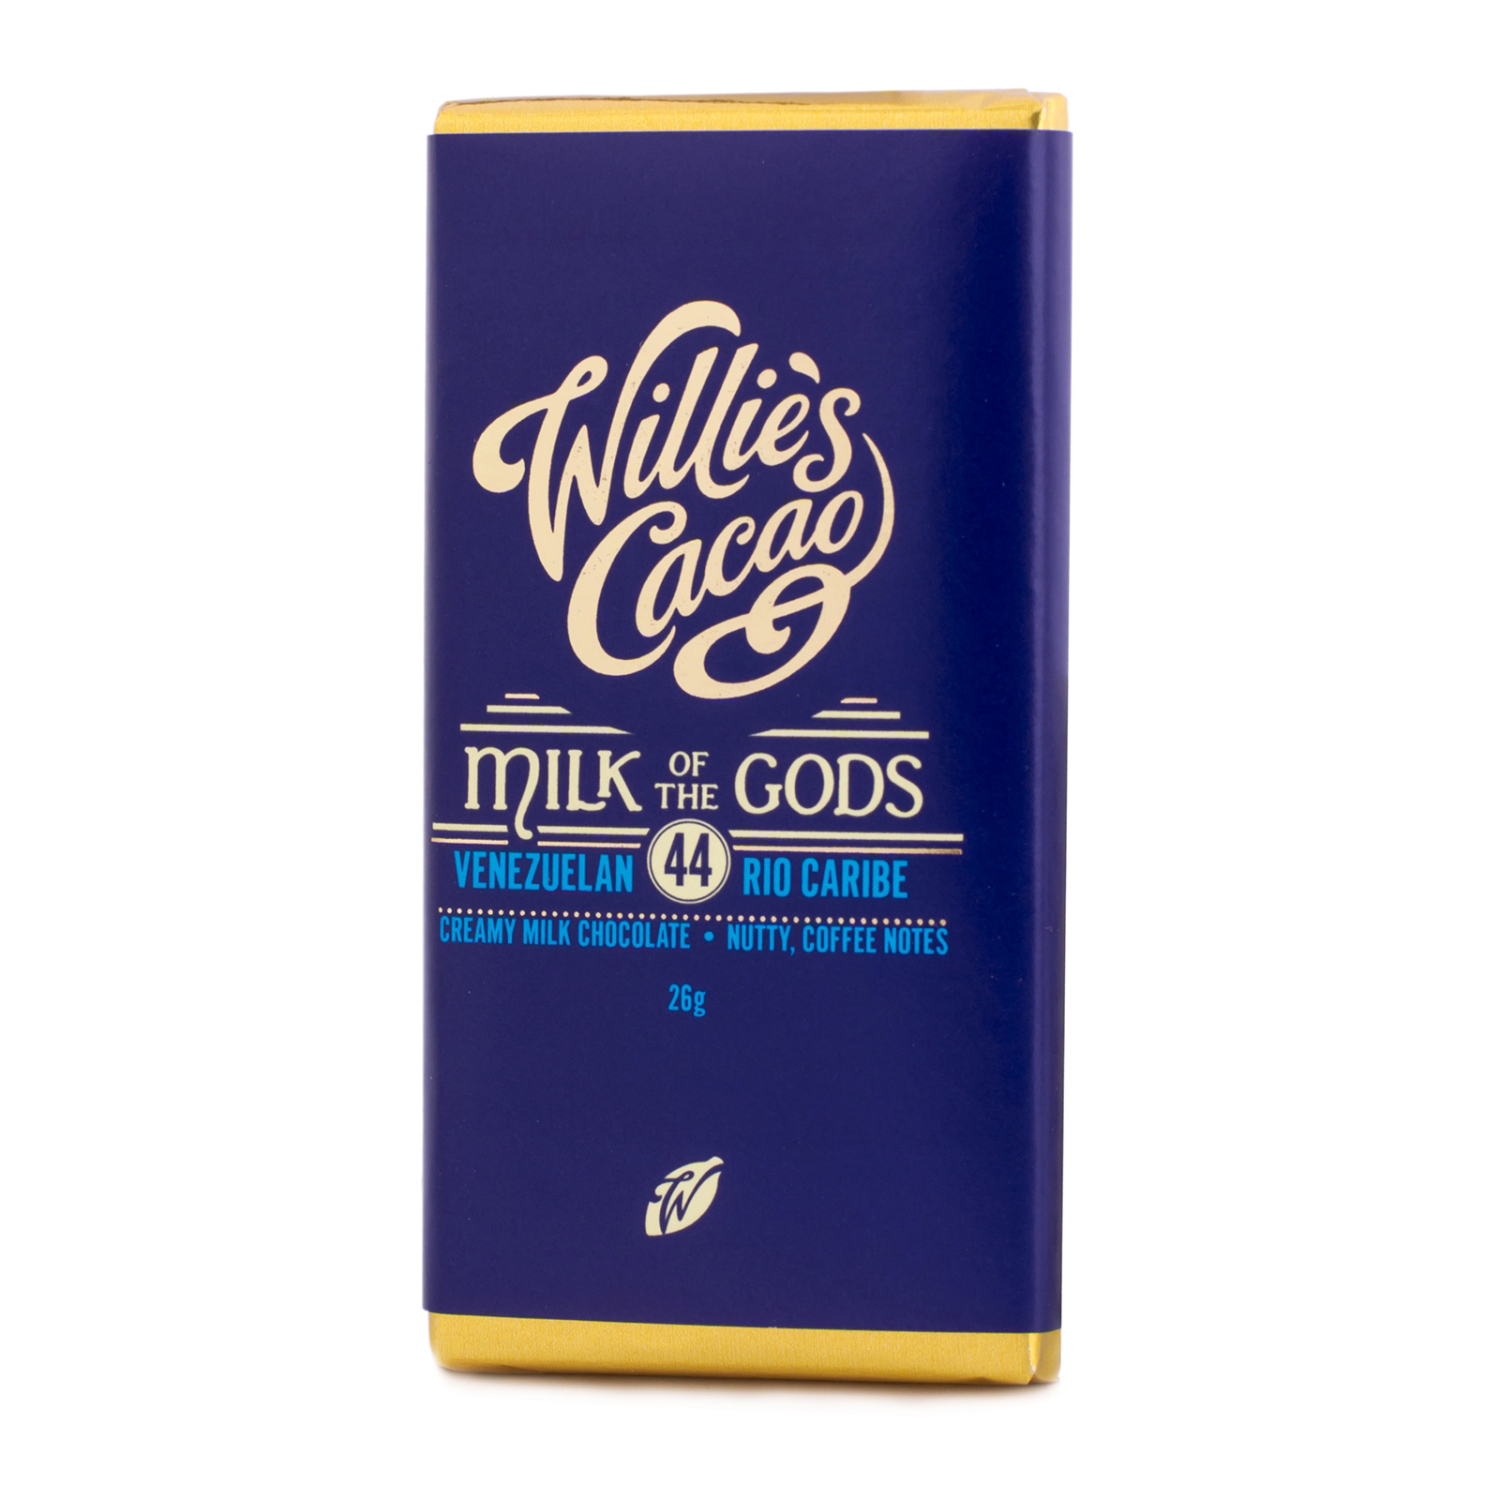 Willie's Cacao - Milk of the Gods 26g